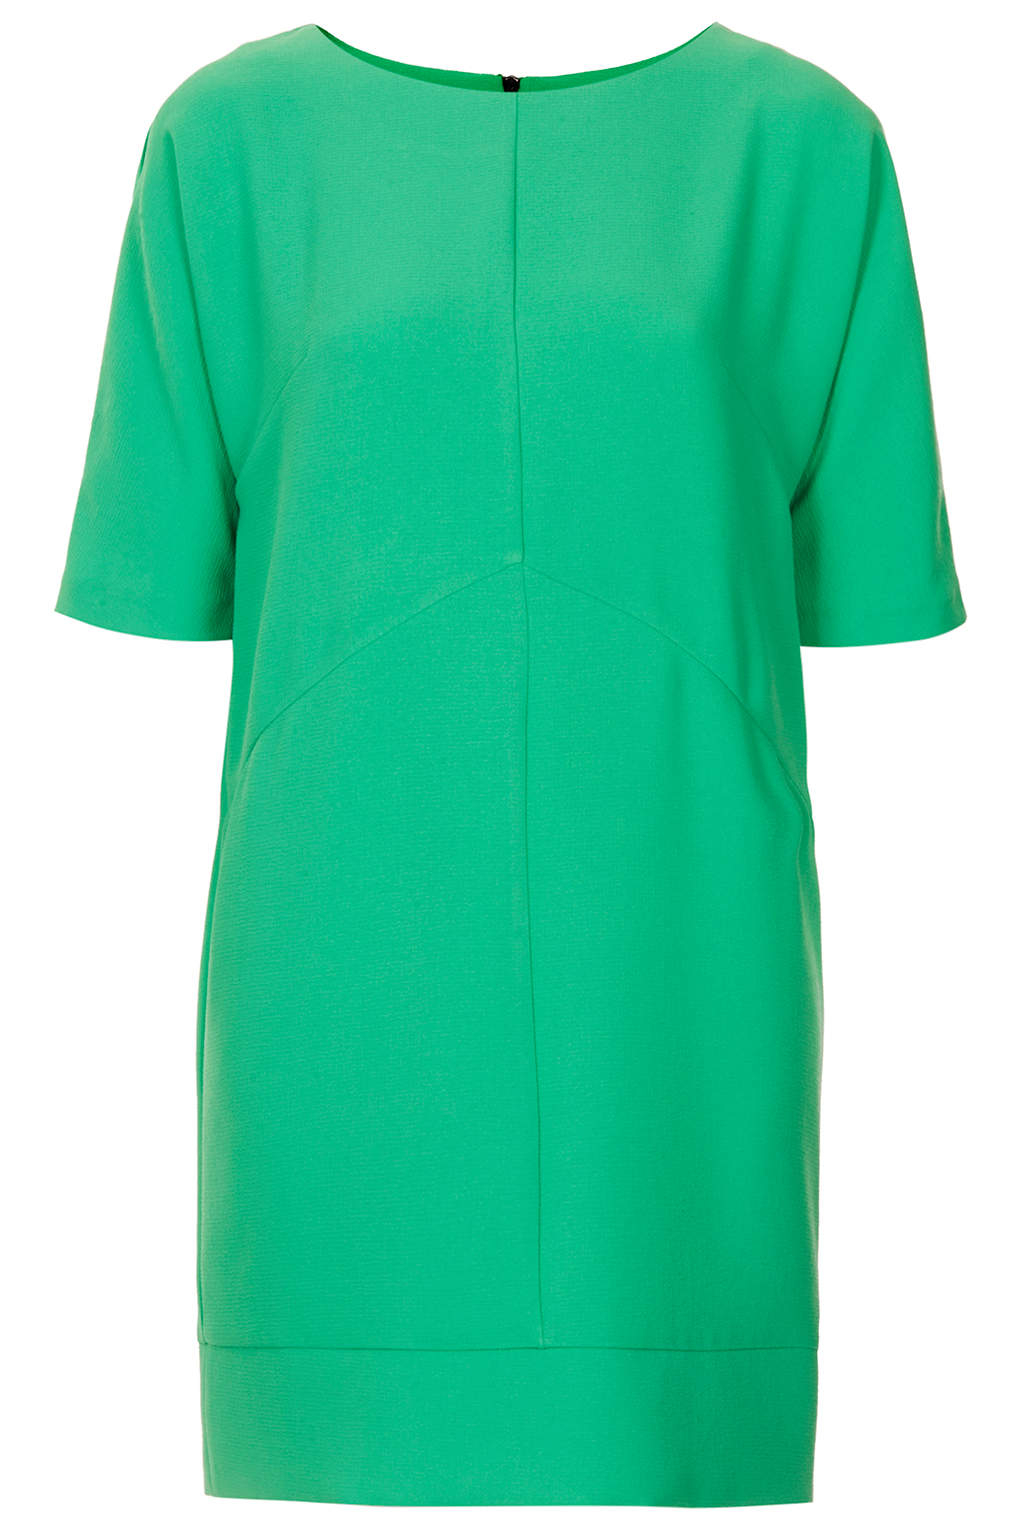 Lyst - Topshop Seamed Textured Tunic Dress in Green